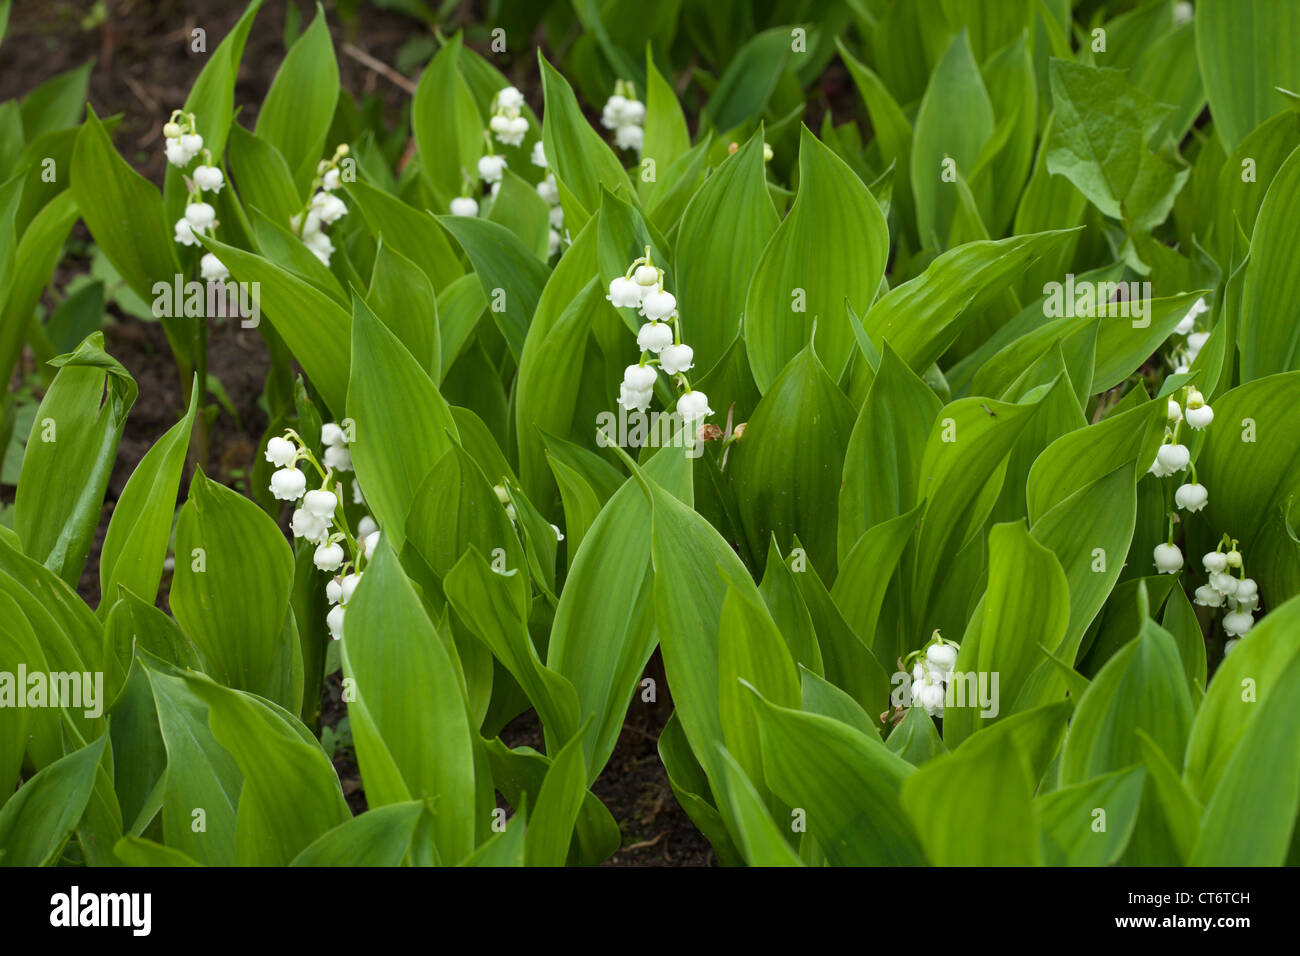 European lily of the valley : Convallaria majalis - Liliaceae (Lily)